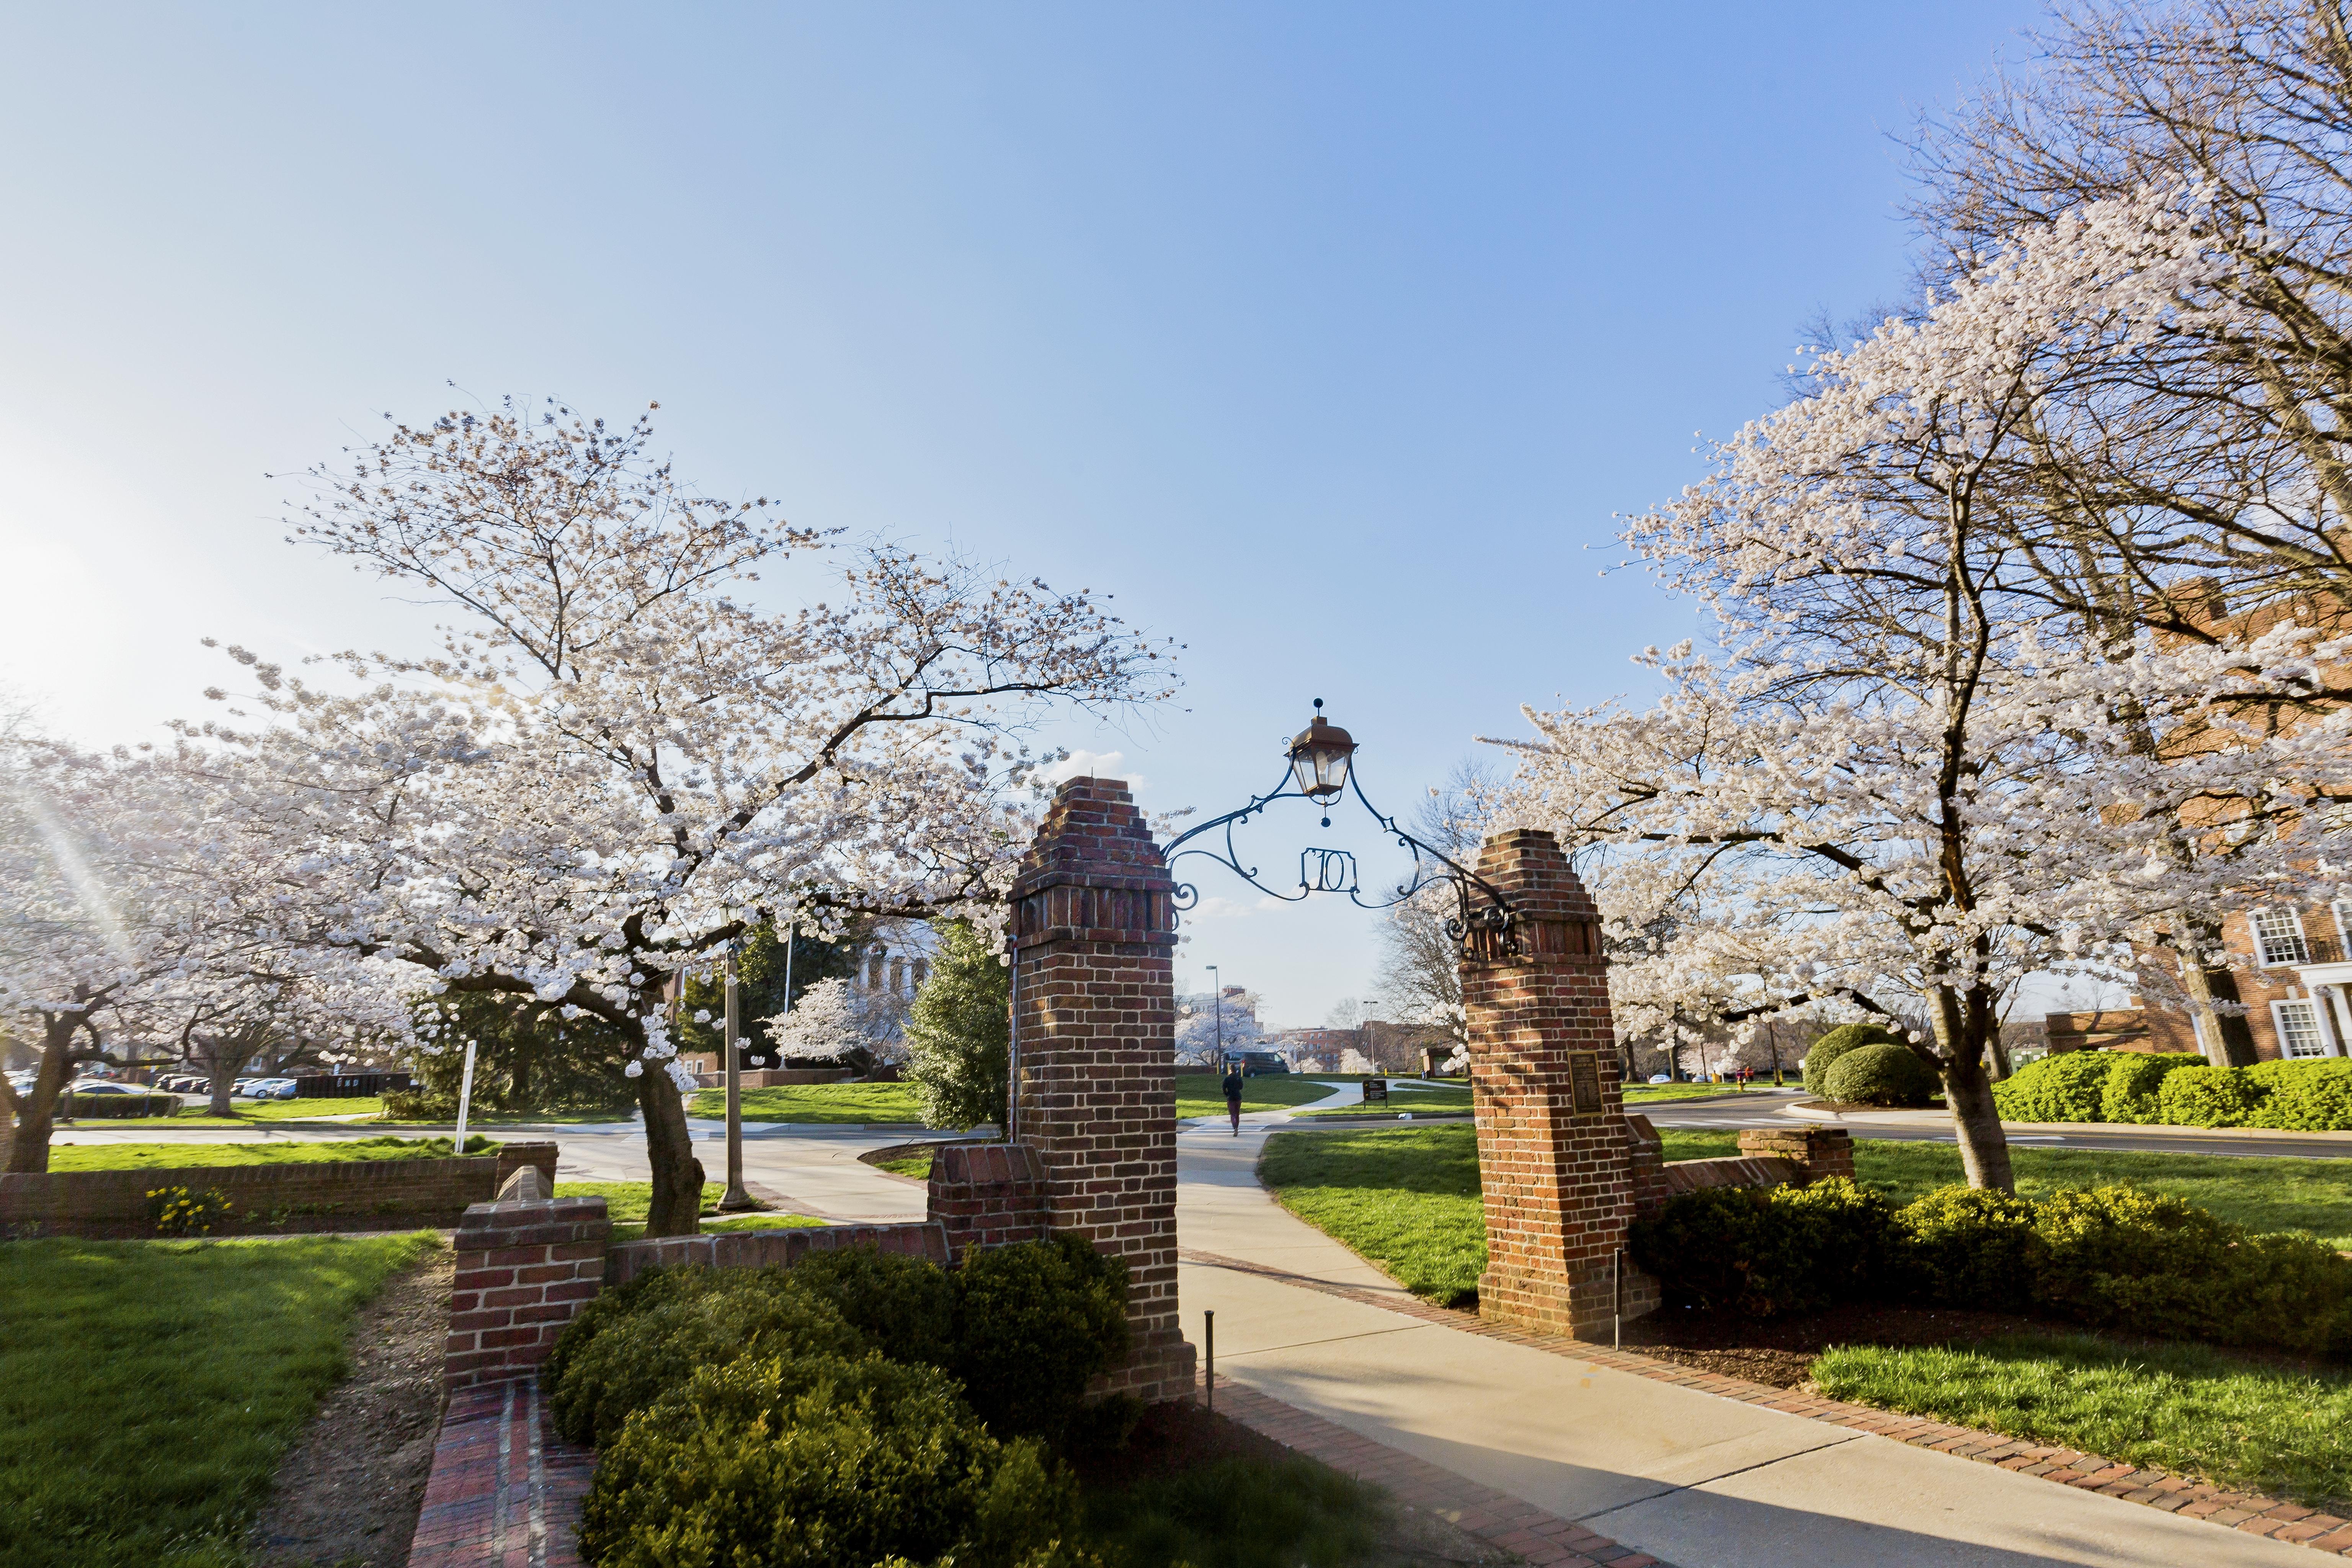 UMD archway with cherry blossom trees in the background.